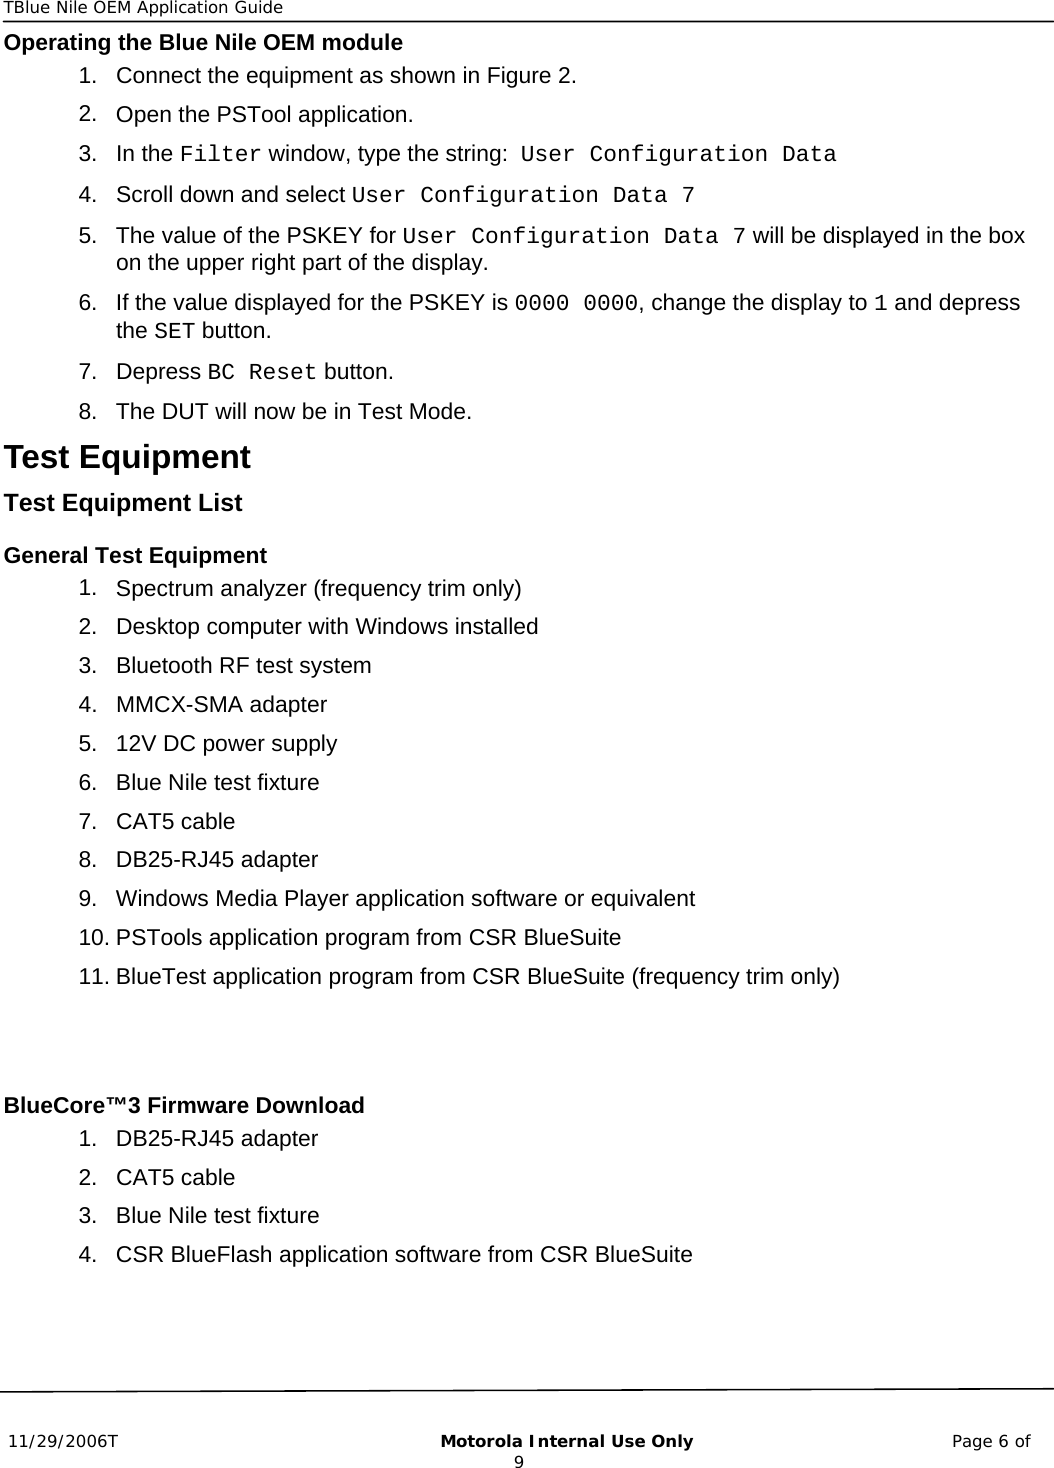 TBlue Nile OEM Application Guide      11/29/2006T                                                       Motorola Internal Use Only                                            Page 6 of 9 Operating the Blue Nile OEM module 1. 2. 3. 4. 5. 6. 7. 8. 1. 2. 3. 4. 5. 6. 7. 8. 9. 10. 11. 1. 2. 3. 4. Connect the equipment as shown in Figure 2. Open the PSTool application. In the Filter window, type the string:  User Configuration Data Scroll down and select User Configuration Data 7 The value of the PSKEY for User Configuration Data 7 will be displayed in the box on the upper right part of the display. If the value displayed for the PSKEY is 0000 0000, change the display to 1 and depress the SET button. Depress BC Reset button. The DUT will now be in Test Mode.  Test Equipment Test Equipment List General Test Equipment Spectrum analyzer (frequency trim only) Desktop computer with Windows installed Bluetooth RF test system  MMCX-SMA adapter 12V DC power supply Blue Nile test fixture CAT5 cable DB25-RJ45 adapter Windows Media Player application software or equivalent PSTools application program from CSR BlueSuite BlueTest application program from CSR BlueSuite (frequency trim only)   BlueCore™3 Firmware Download DB25-RJ45 adapter CAT5 cable Blue Nile test fixture CSR BlueFlash application software from CSR BlueSuite 